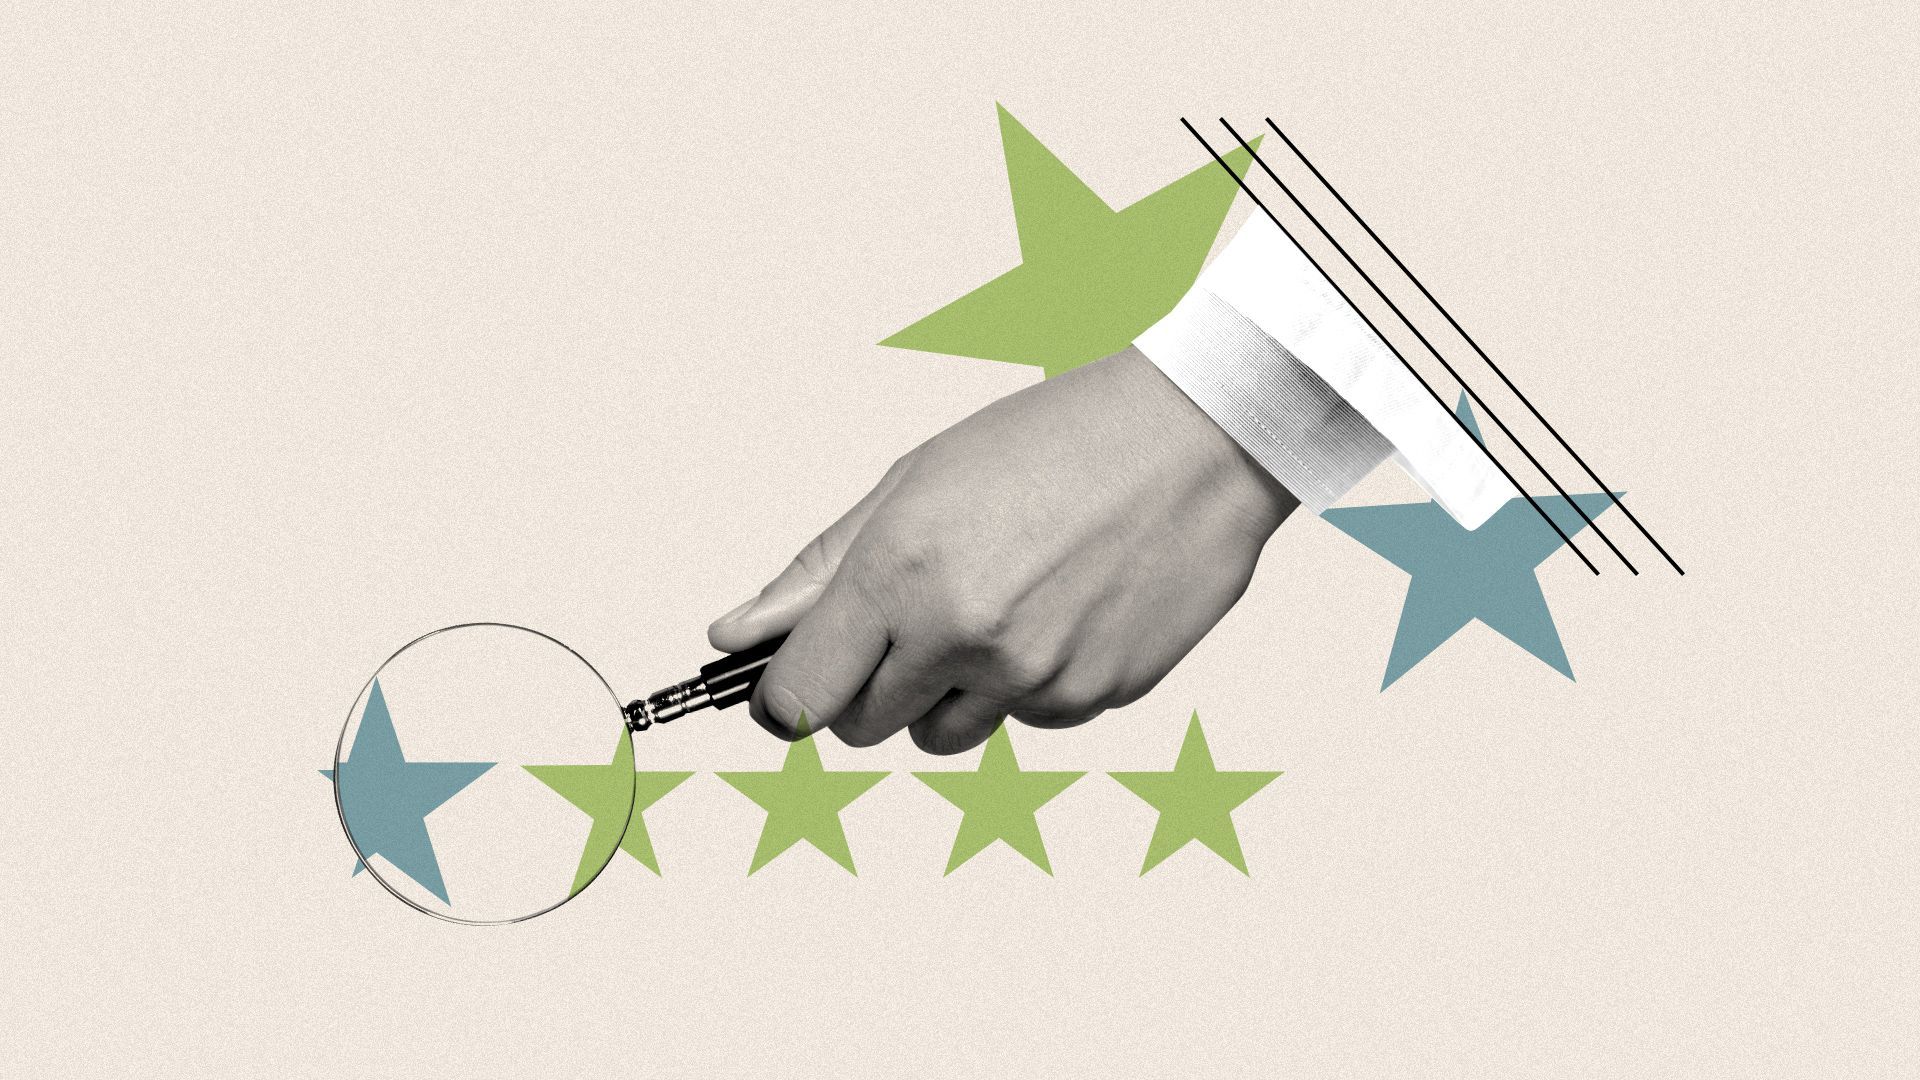 Illustrated collage of a hand holding a magnifying glass examining a rating star system. 